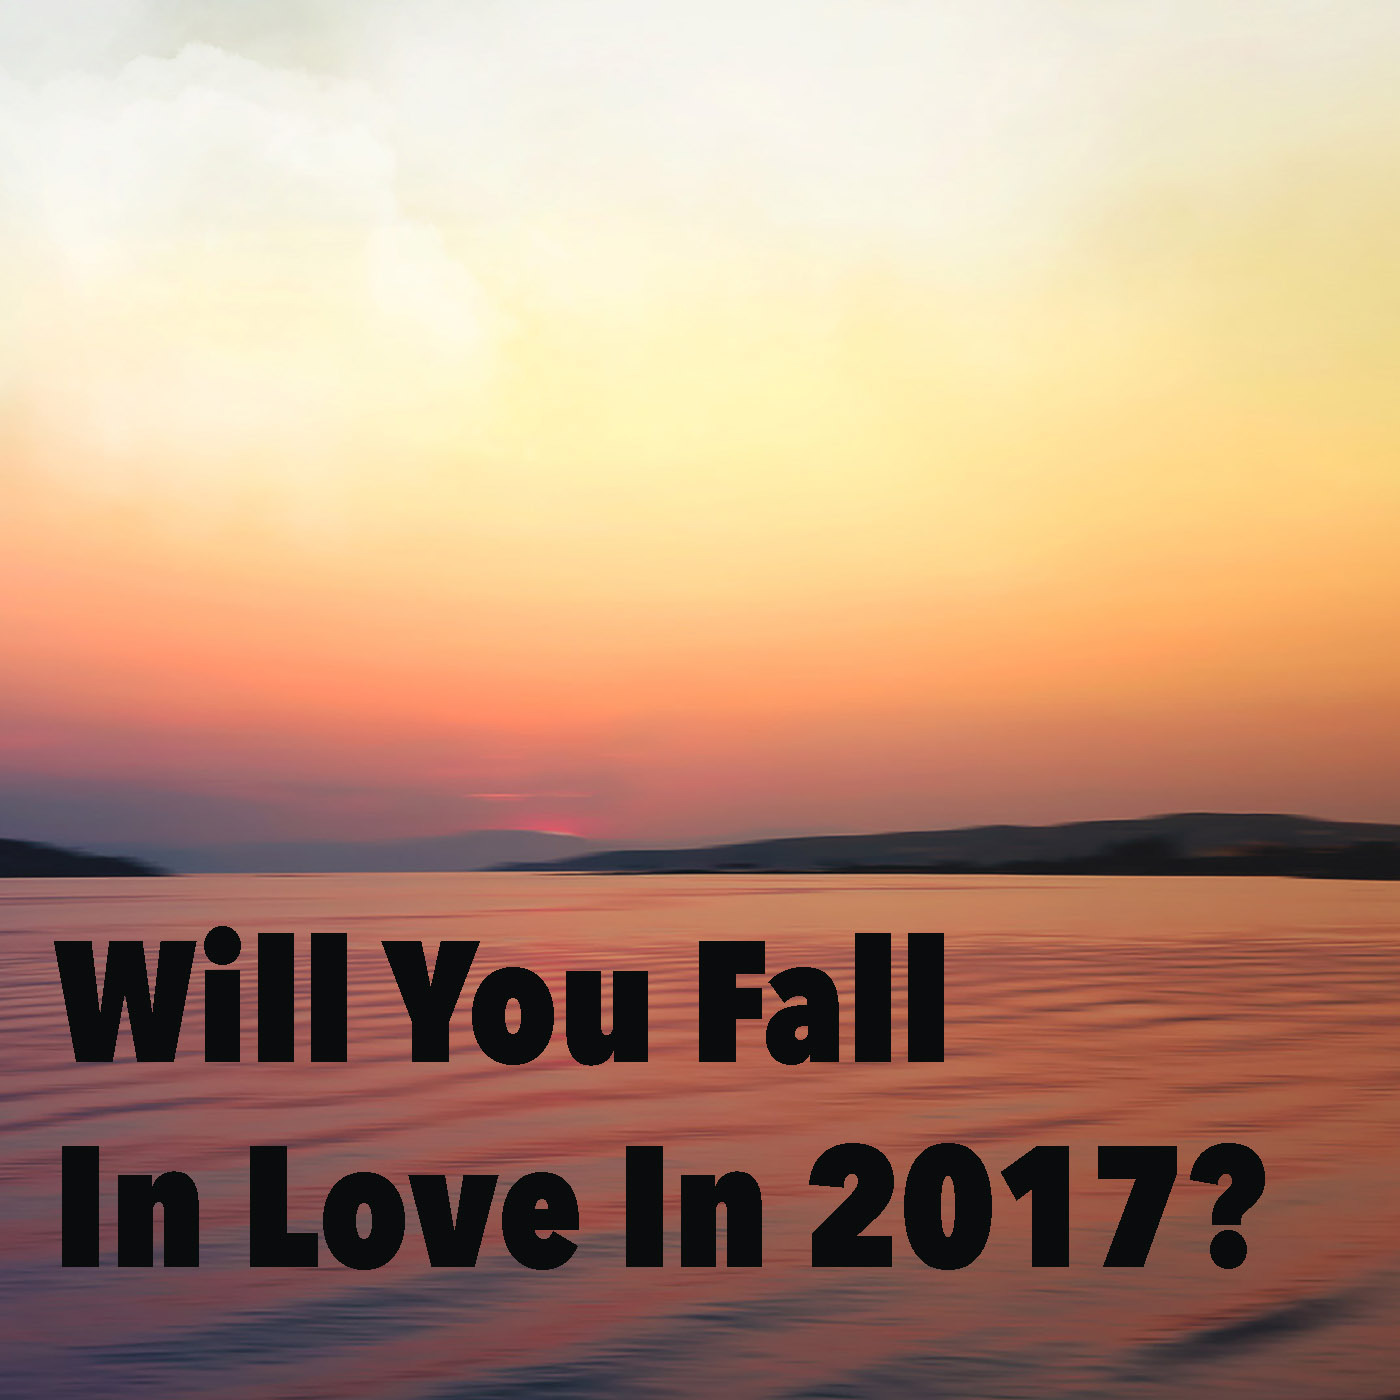 Will You Fall In Love In 2017?